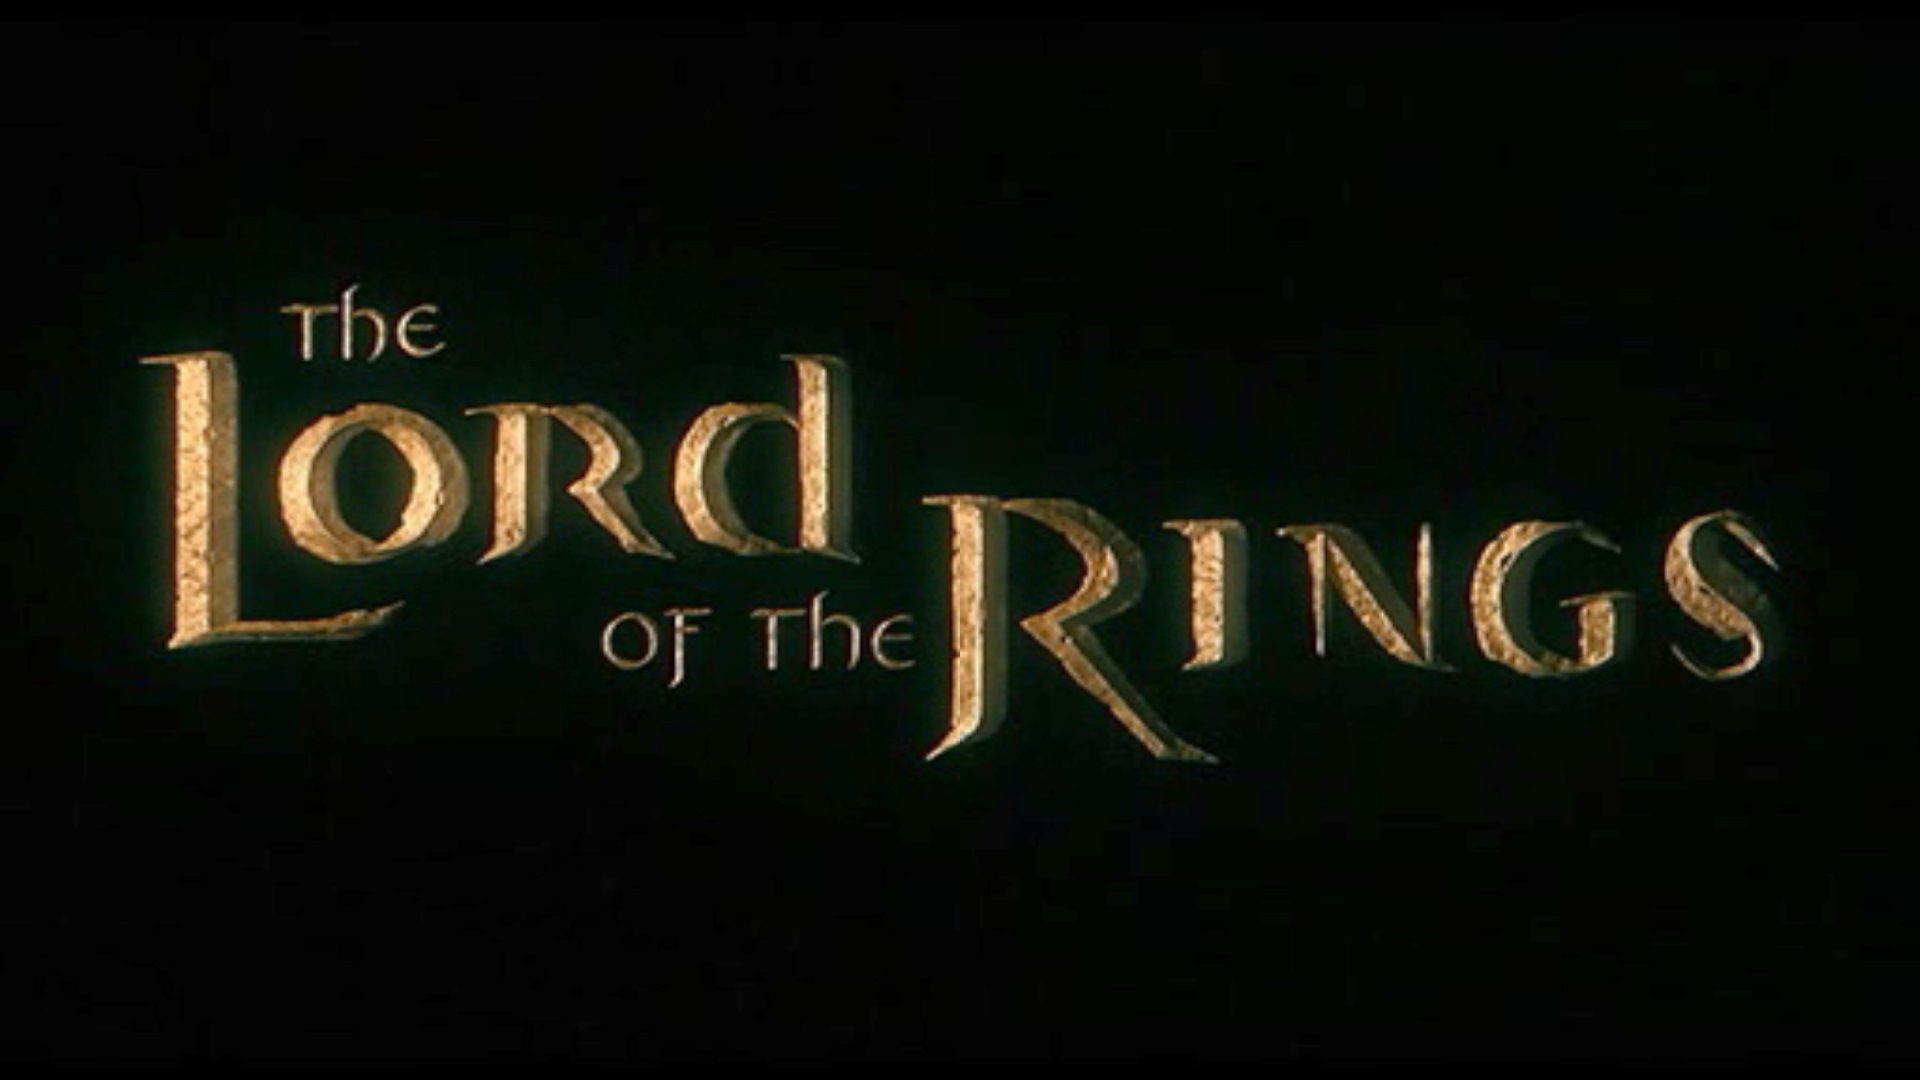 download the new The Lord of the Rings: The Return of